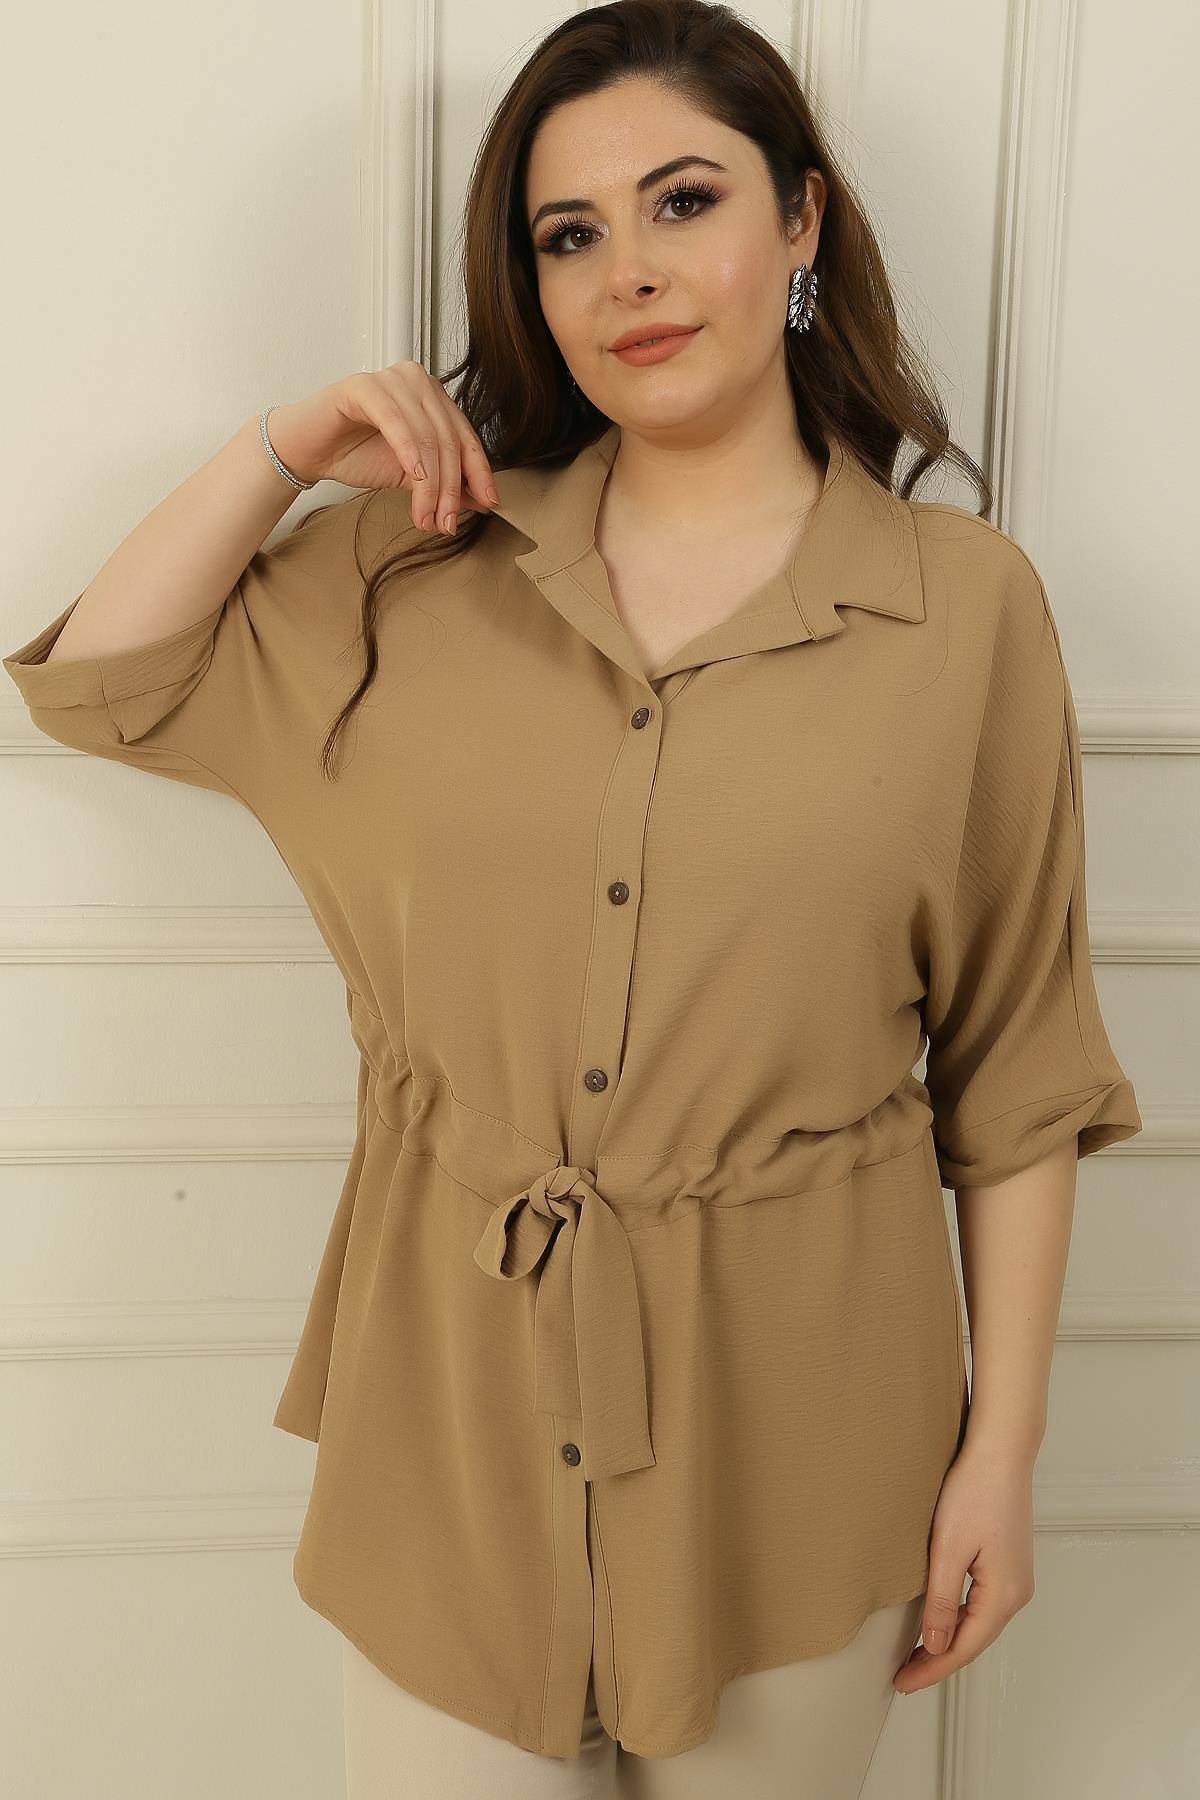 Levně By Saygı Belted Waist and Front Buttoned Plus Size Ayrobin Tunic Shirt